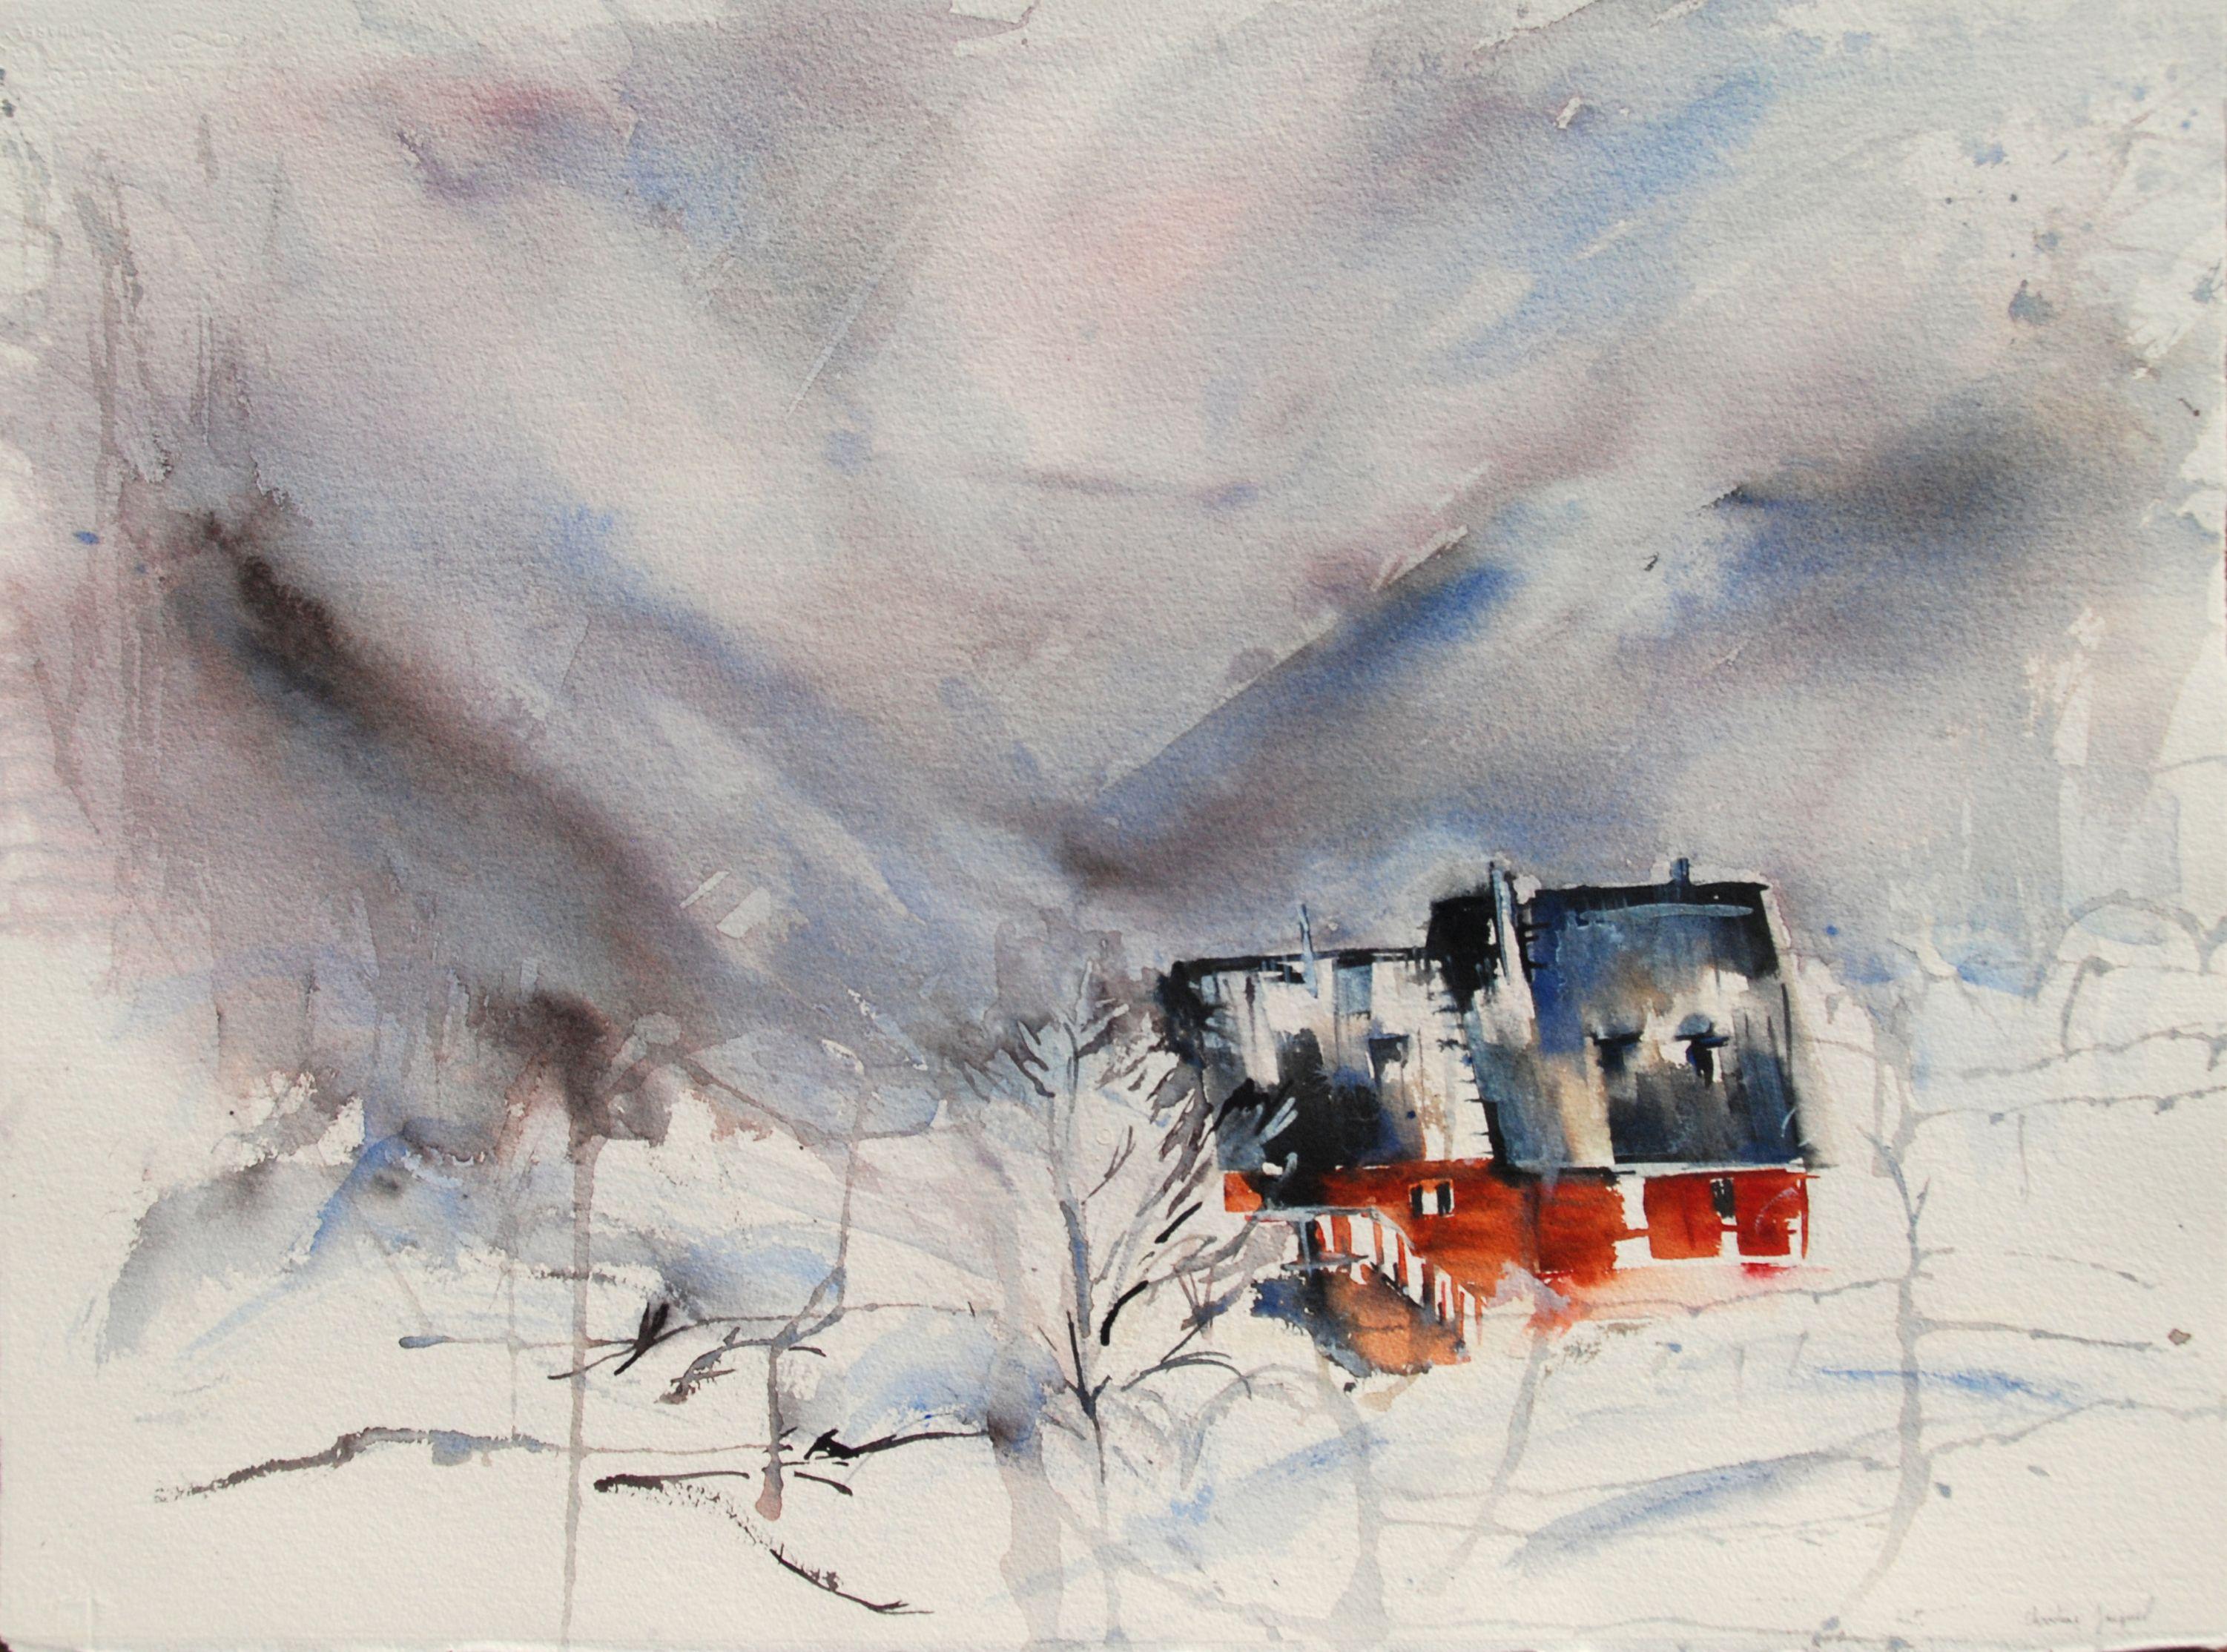 Watercolor of a mountain landscape in winter., Painting, Watercolor on Paper - Art by Christine Jacquel